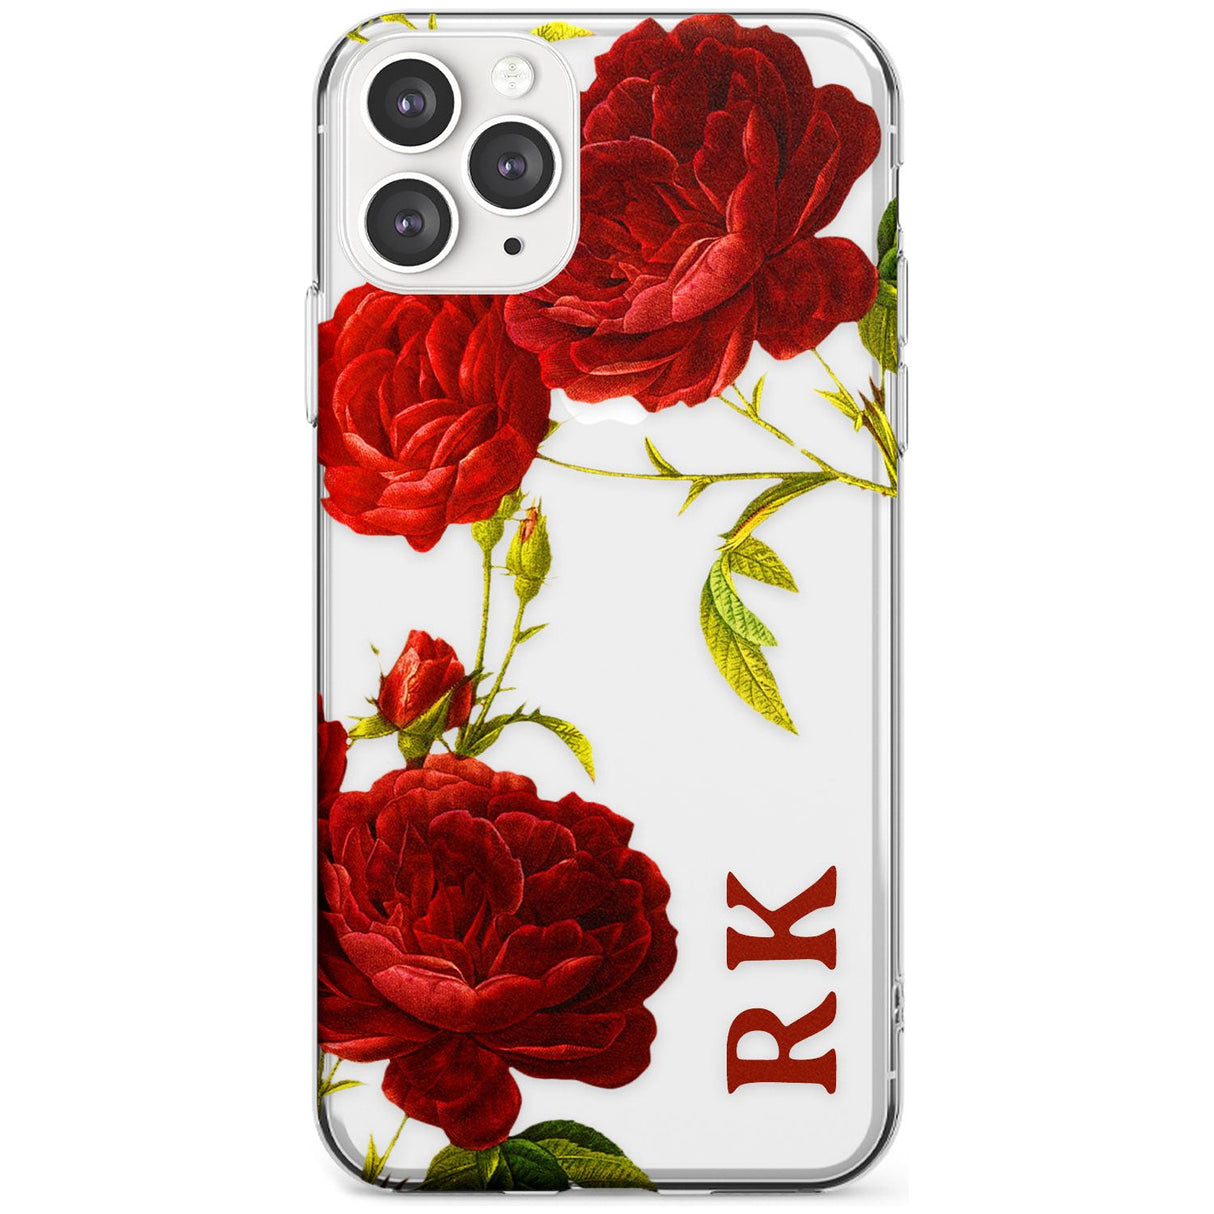 Custom Clear Vintage Floral Red Roses Slim TPU Phone Case for iPhone 11 Pro Max